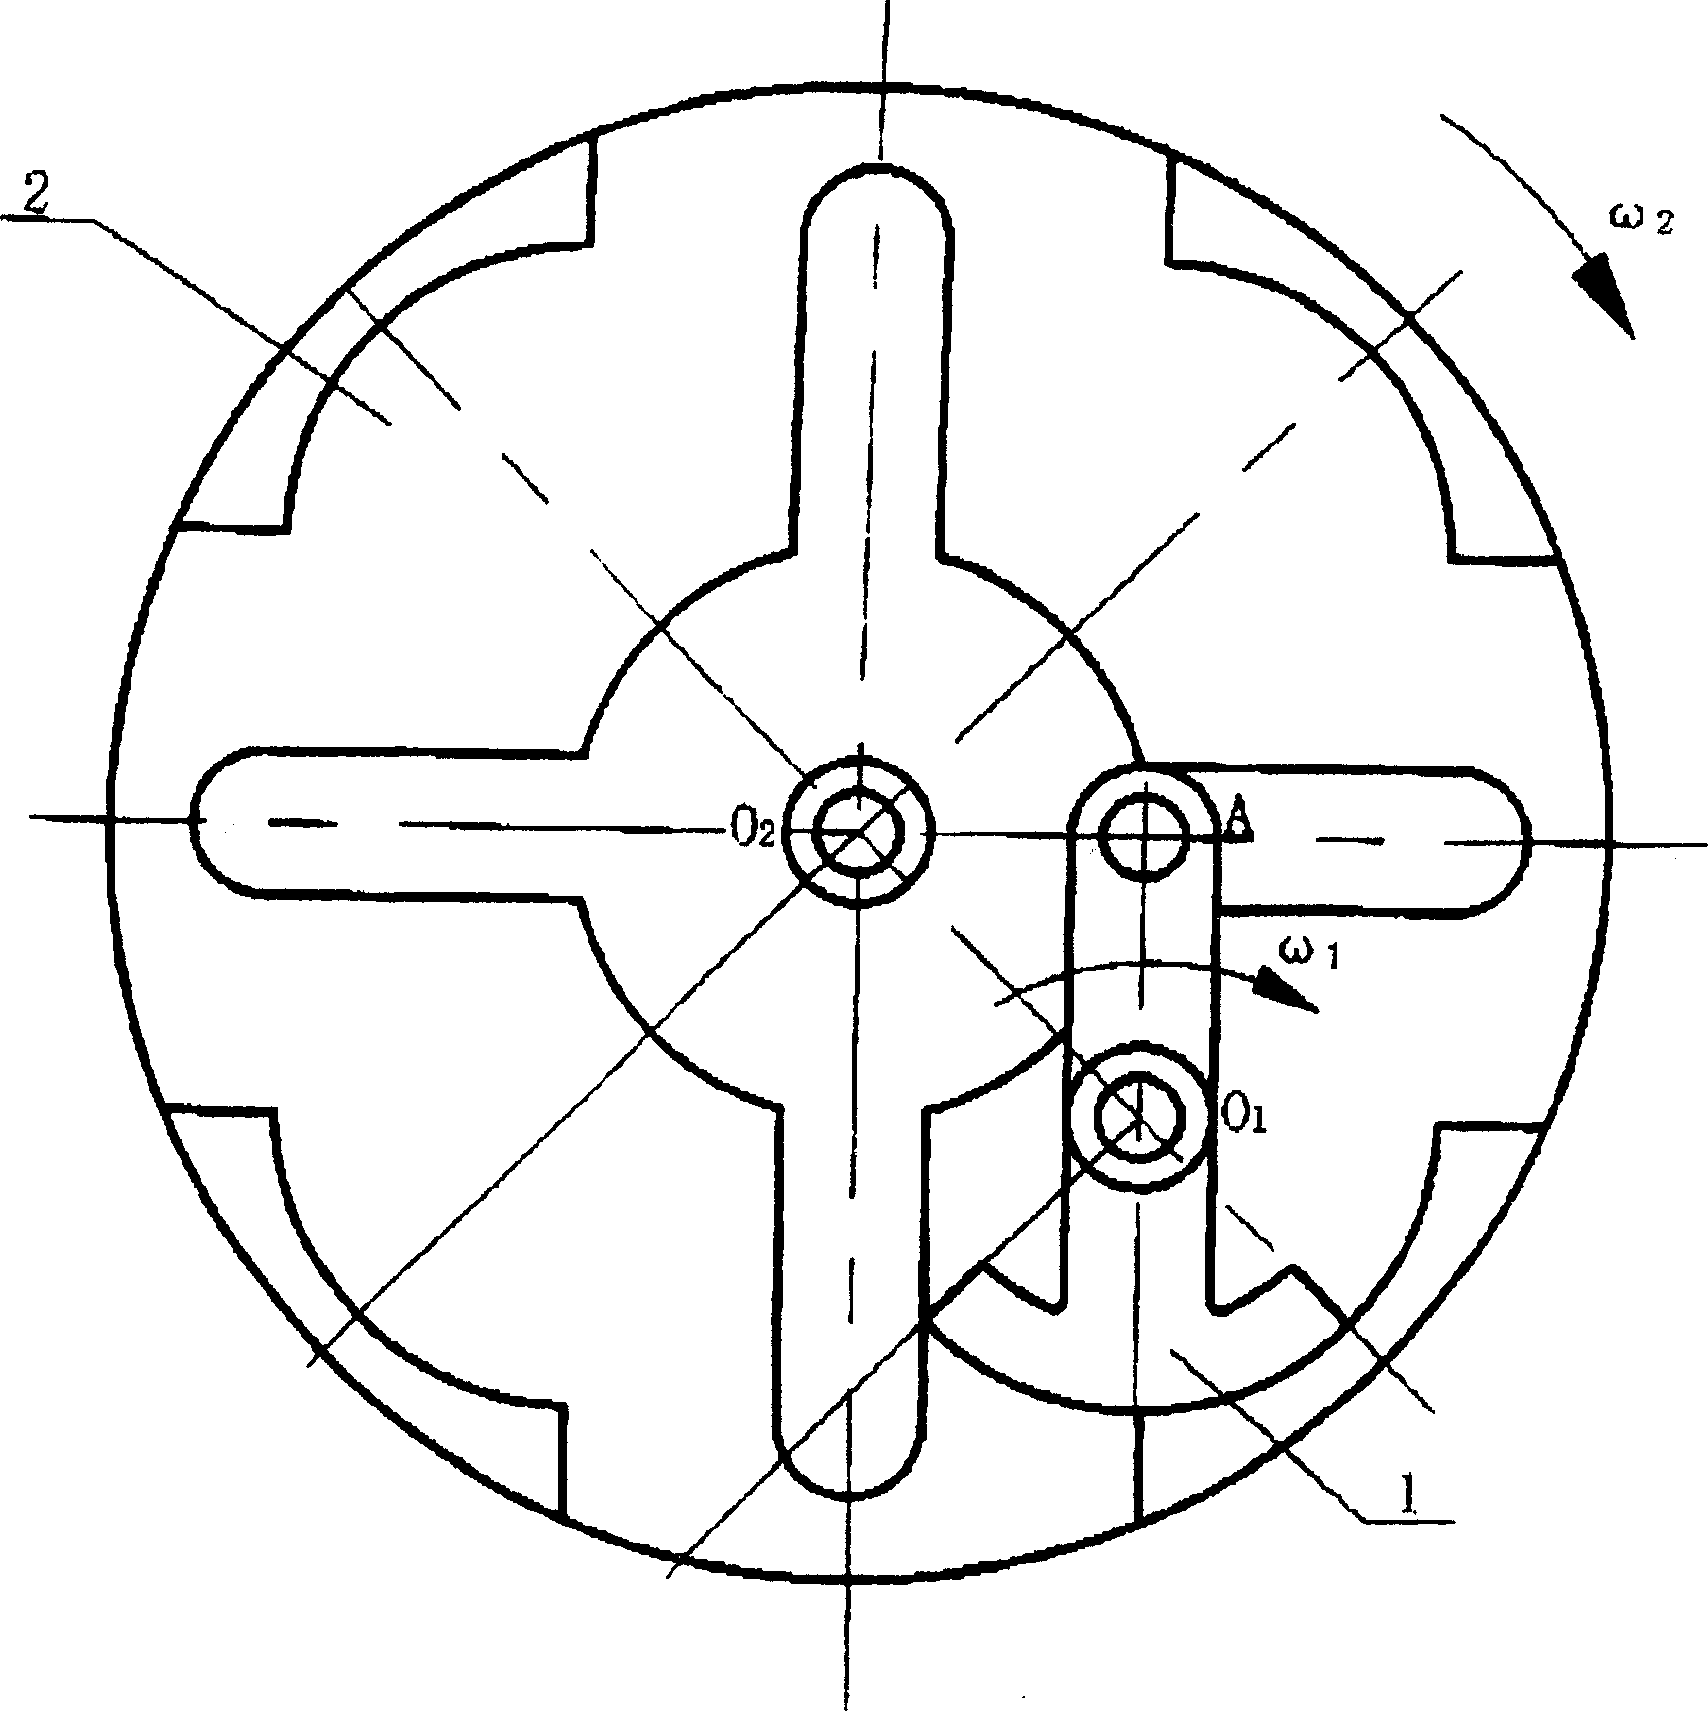 Barrel wall type sheave mechanism for three dimensional vertical axes rotation transmission